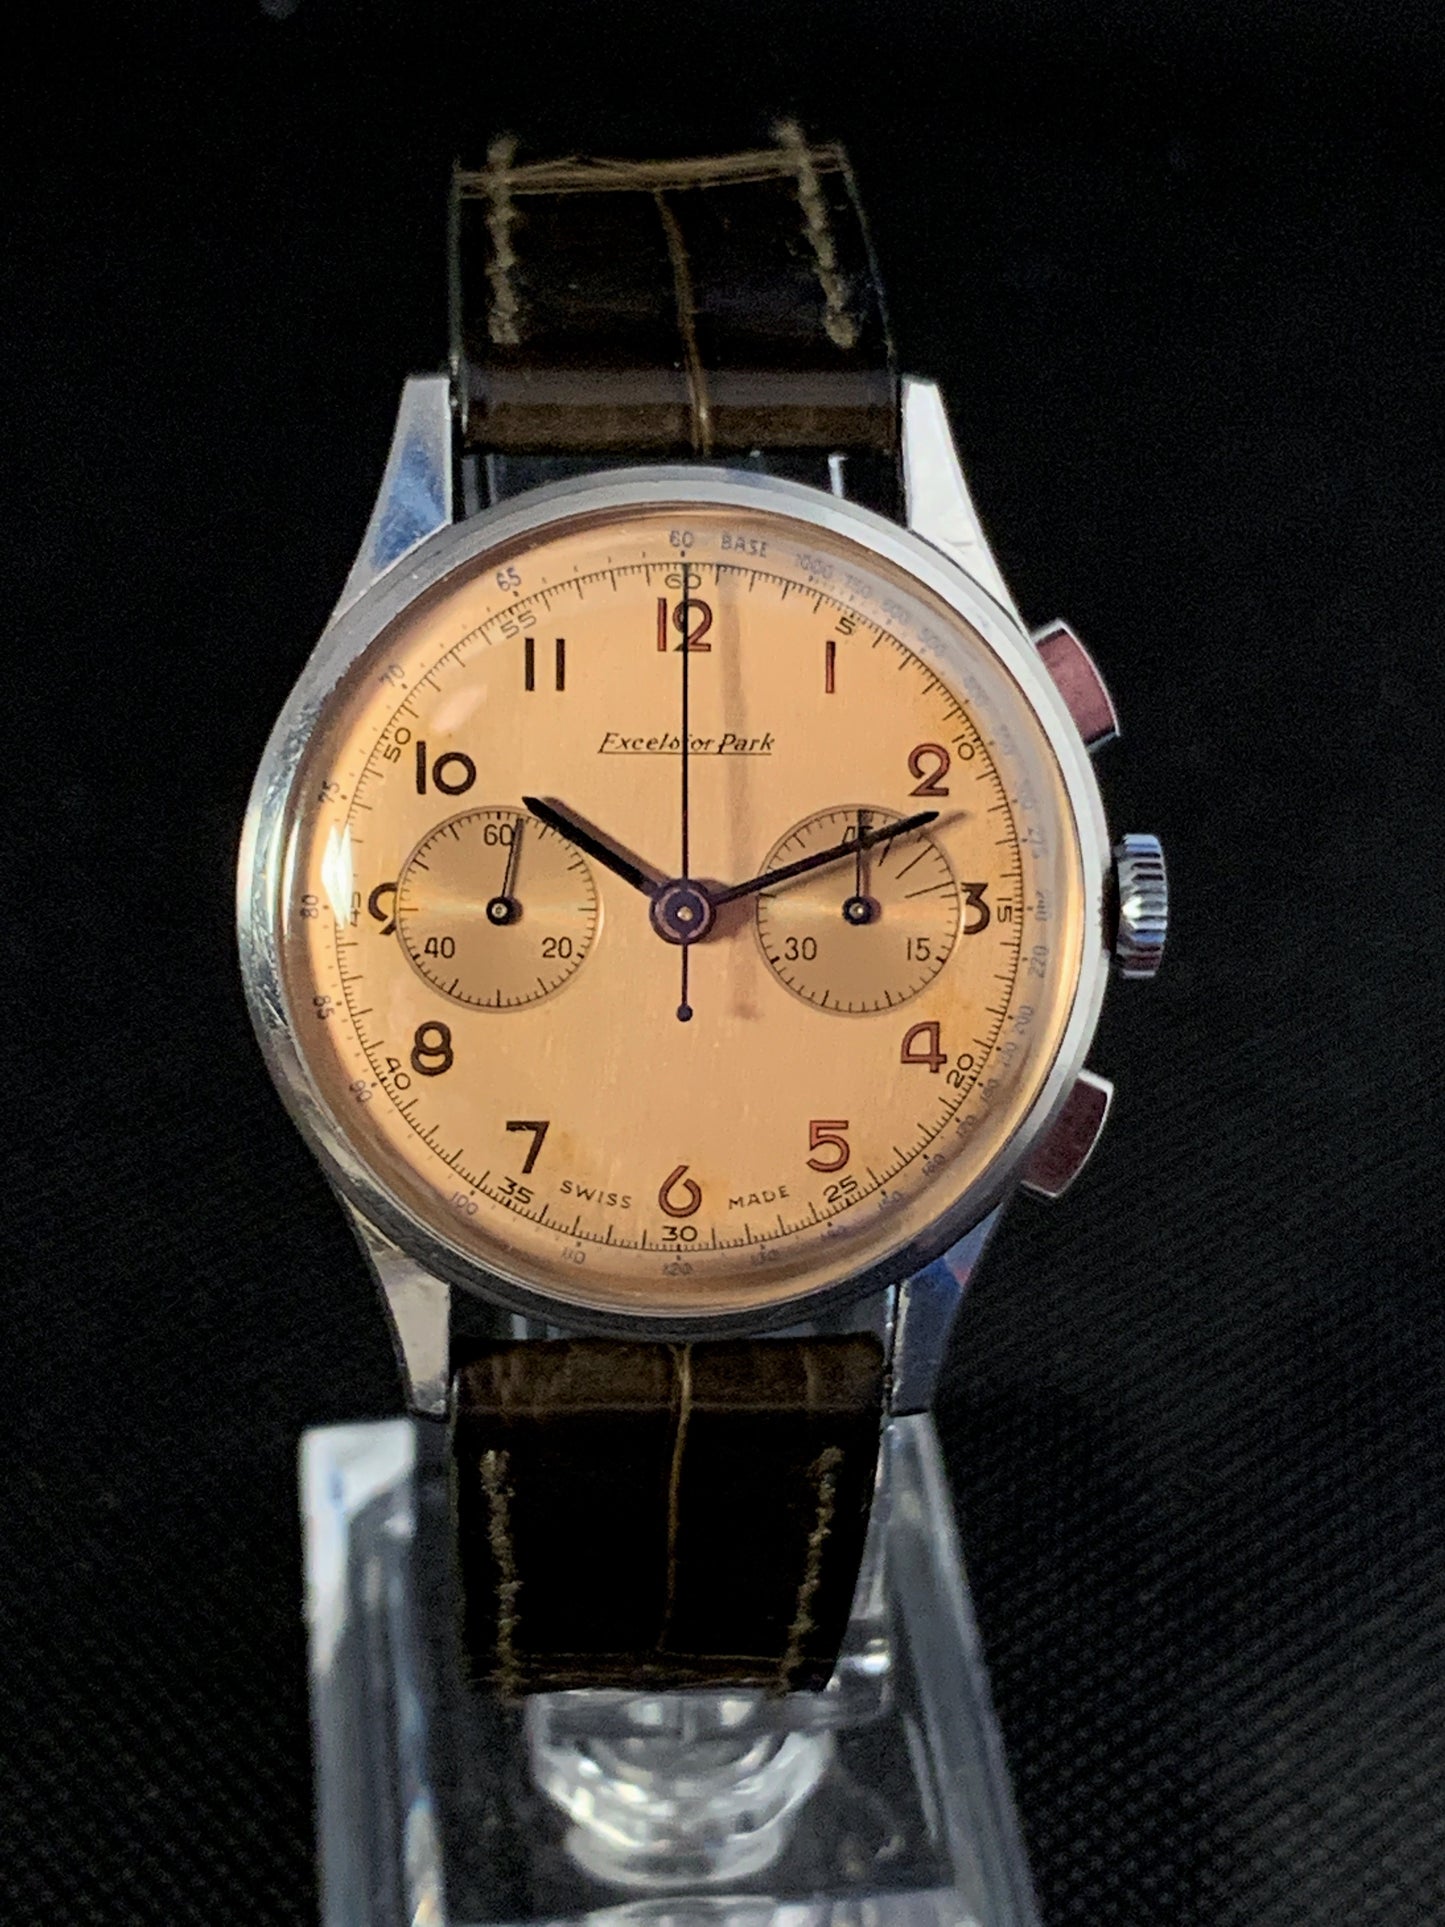 Excelsior Park Cal 40 EP Doctor’s Chronograph 1950s